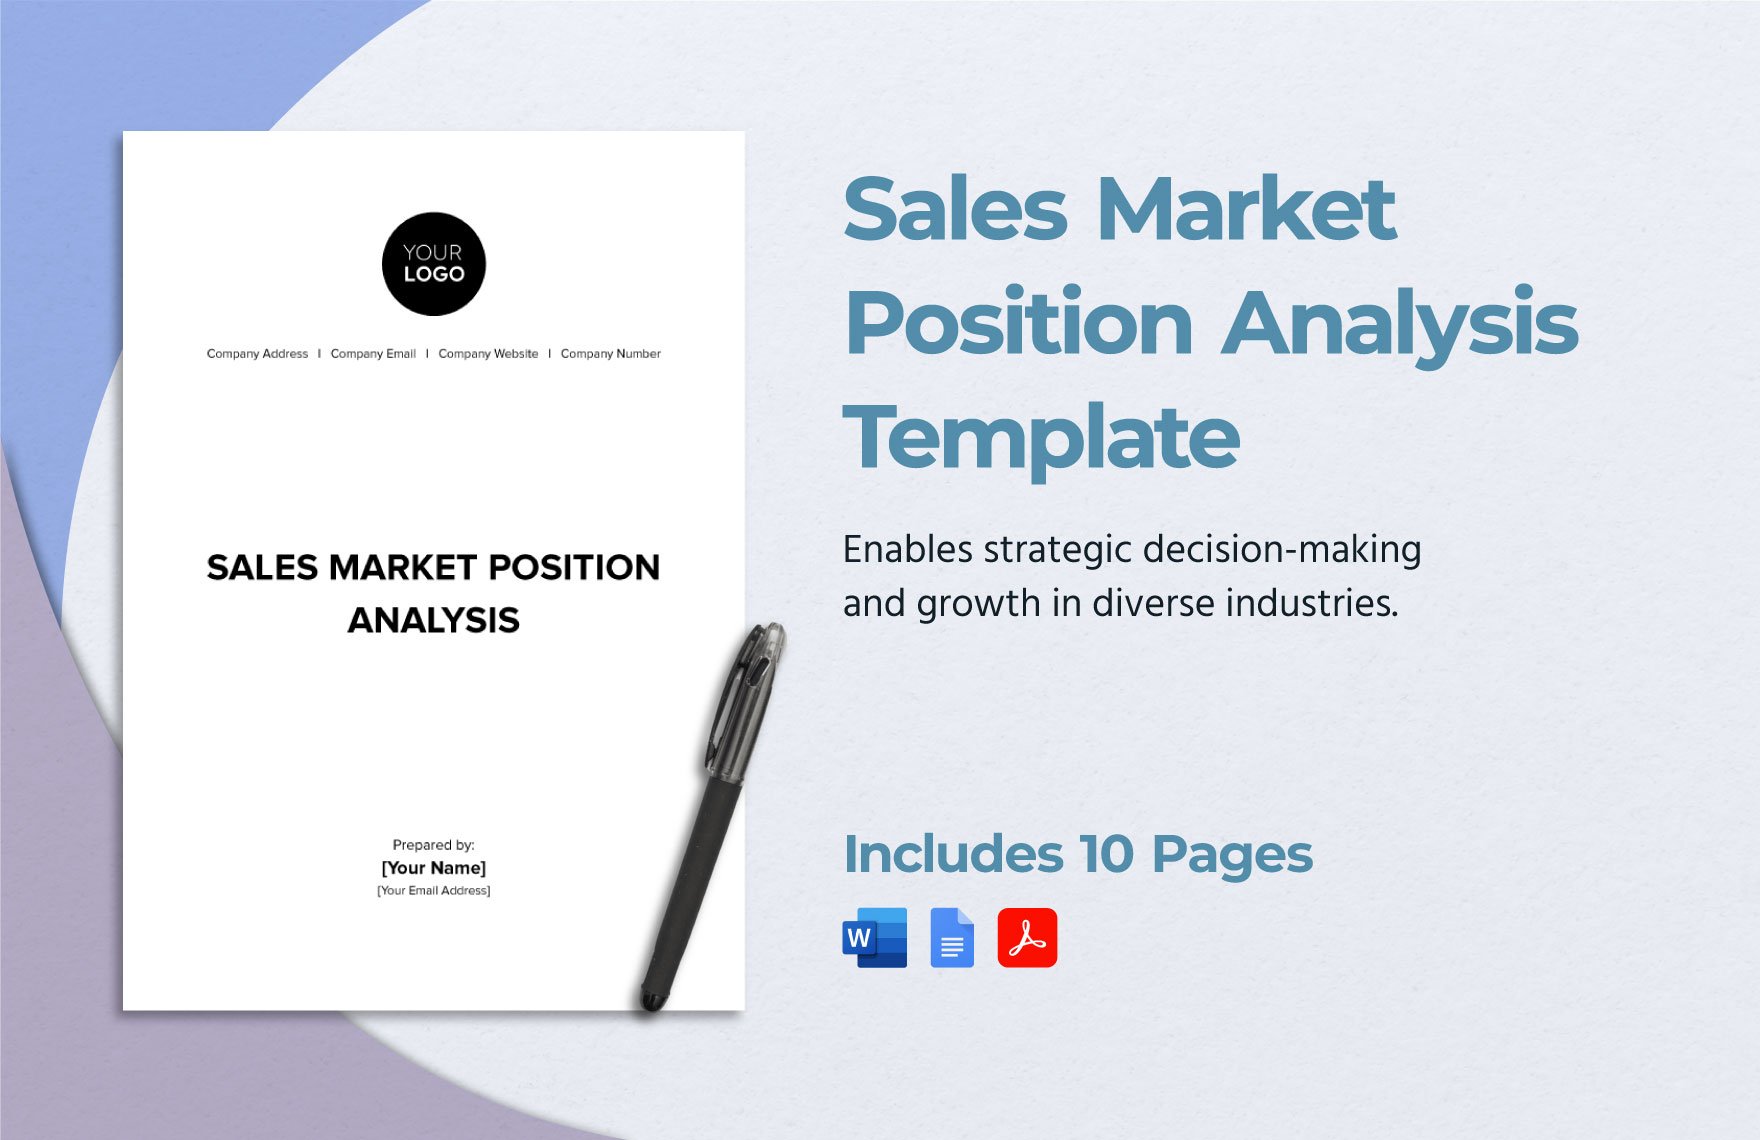 Sales Market Position Analysis Template